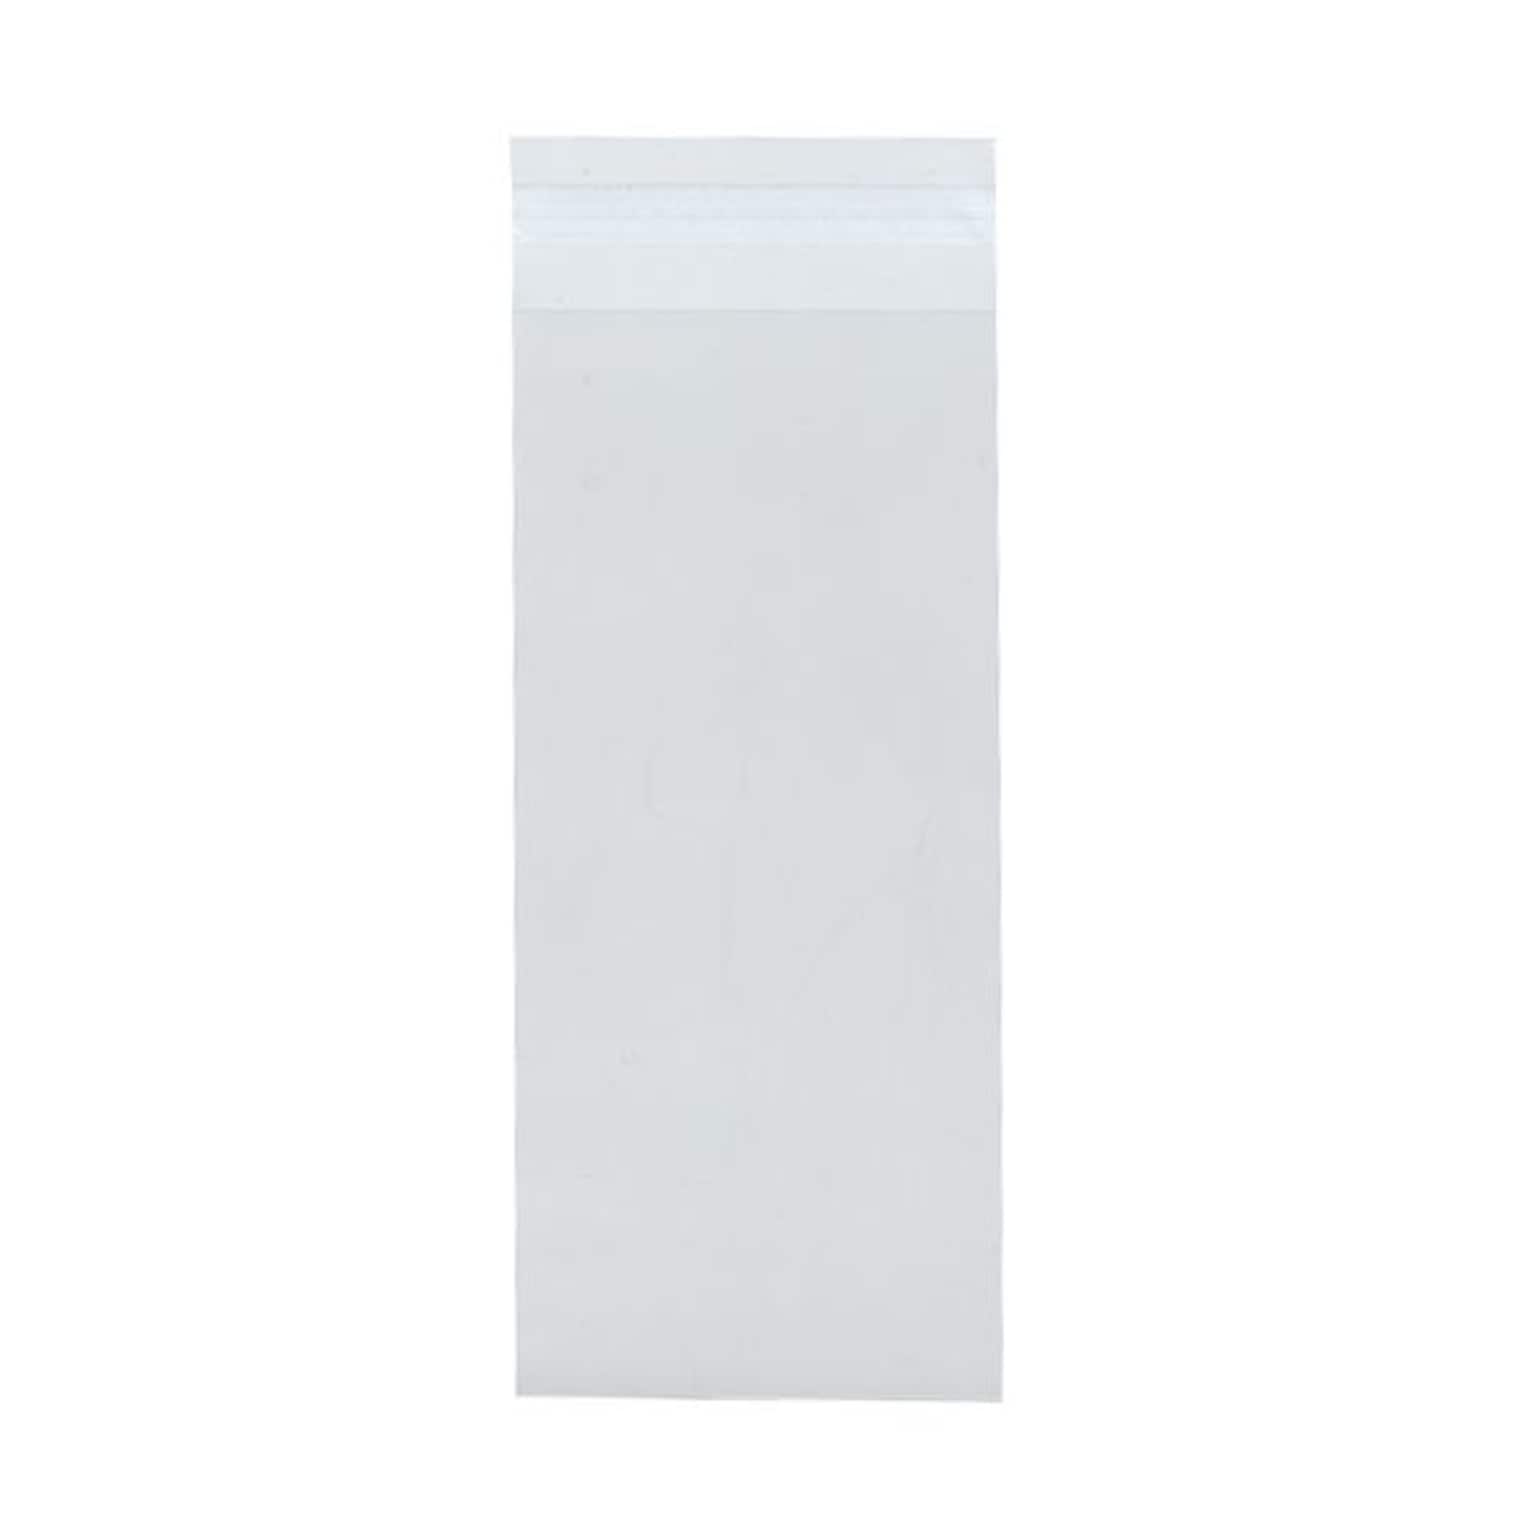 JAM Paper Cello Sleeves with Peel & Seal Closure, #10 Policy, 4.12 x 9.75, Clear, 100/Pack (NUM10CELLO)